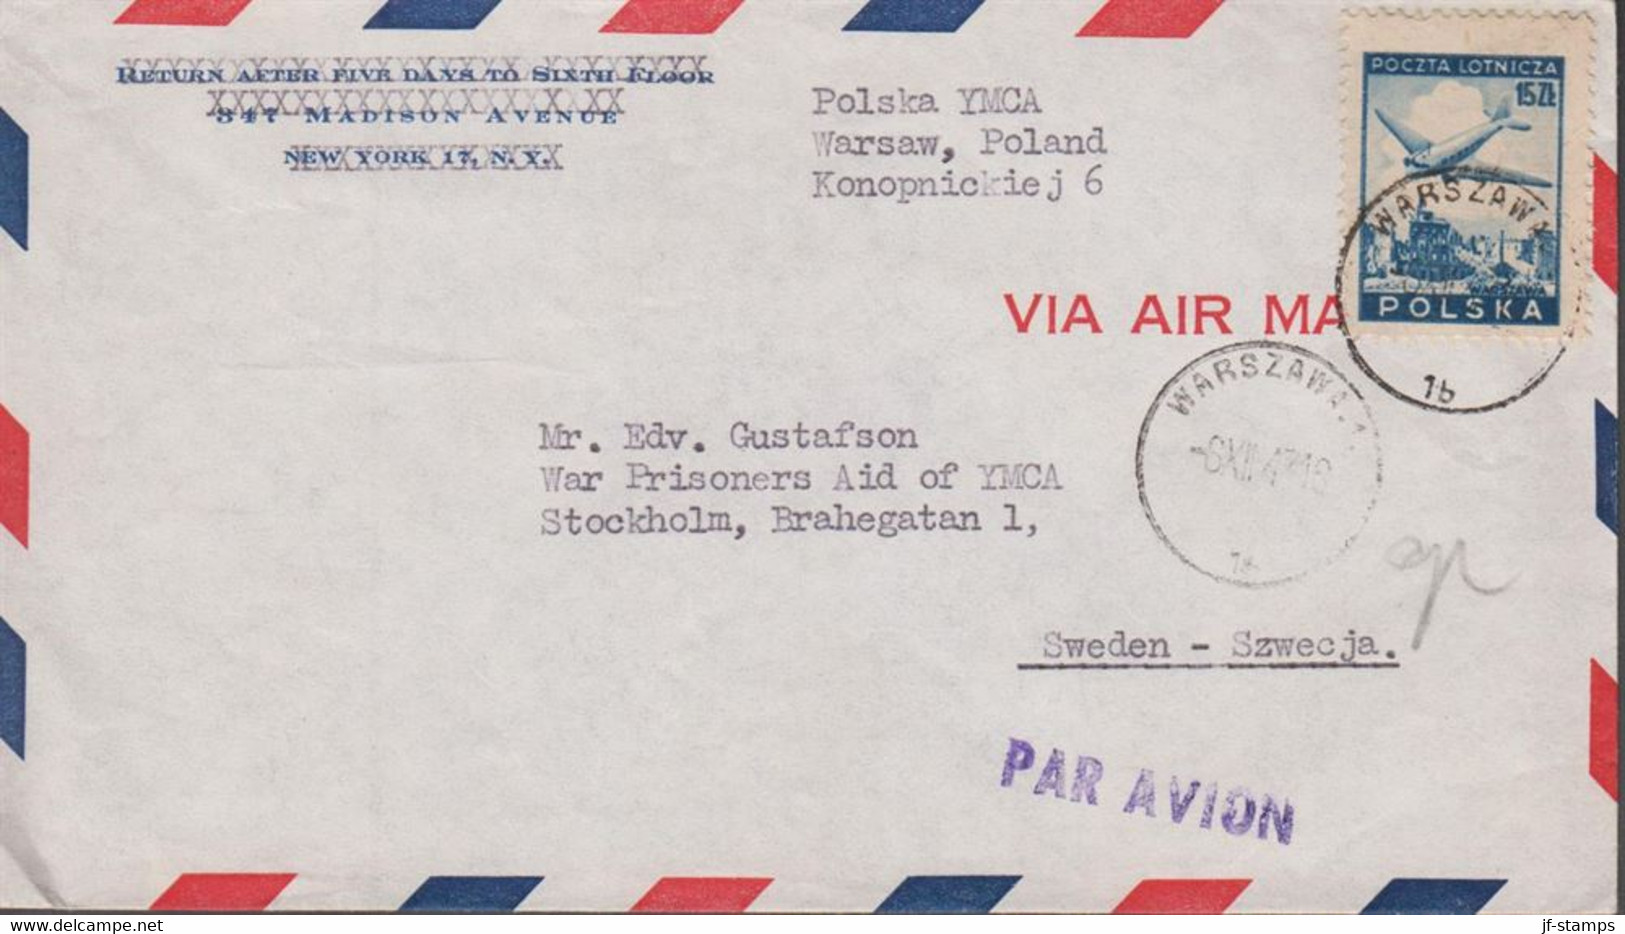 1947. POLSKA 15 Zl. Lissunow Li2 Plane On Cover To War Prisoners Aid Of YMCA, Stockholm, Swed... (Michel 430) - JF516973 - Government In Exile In London